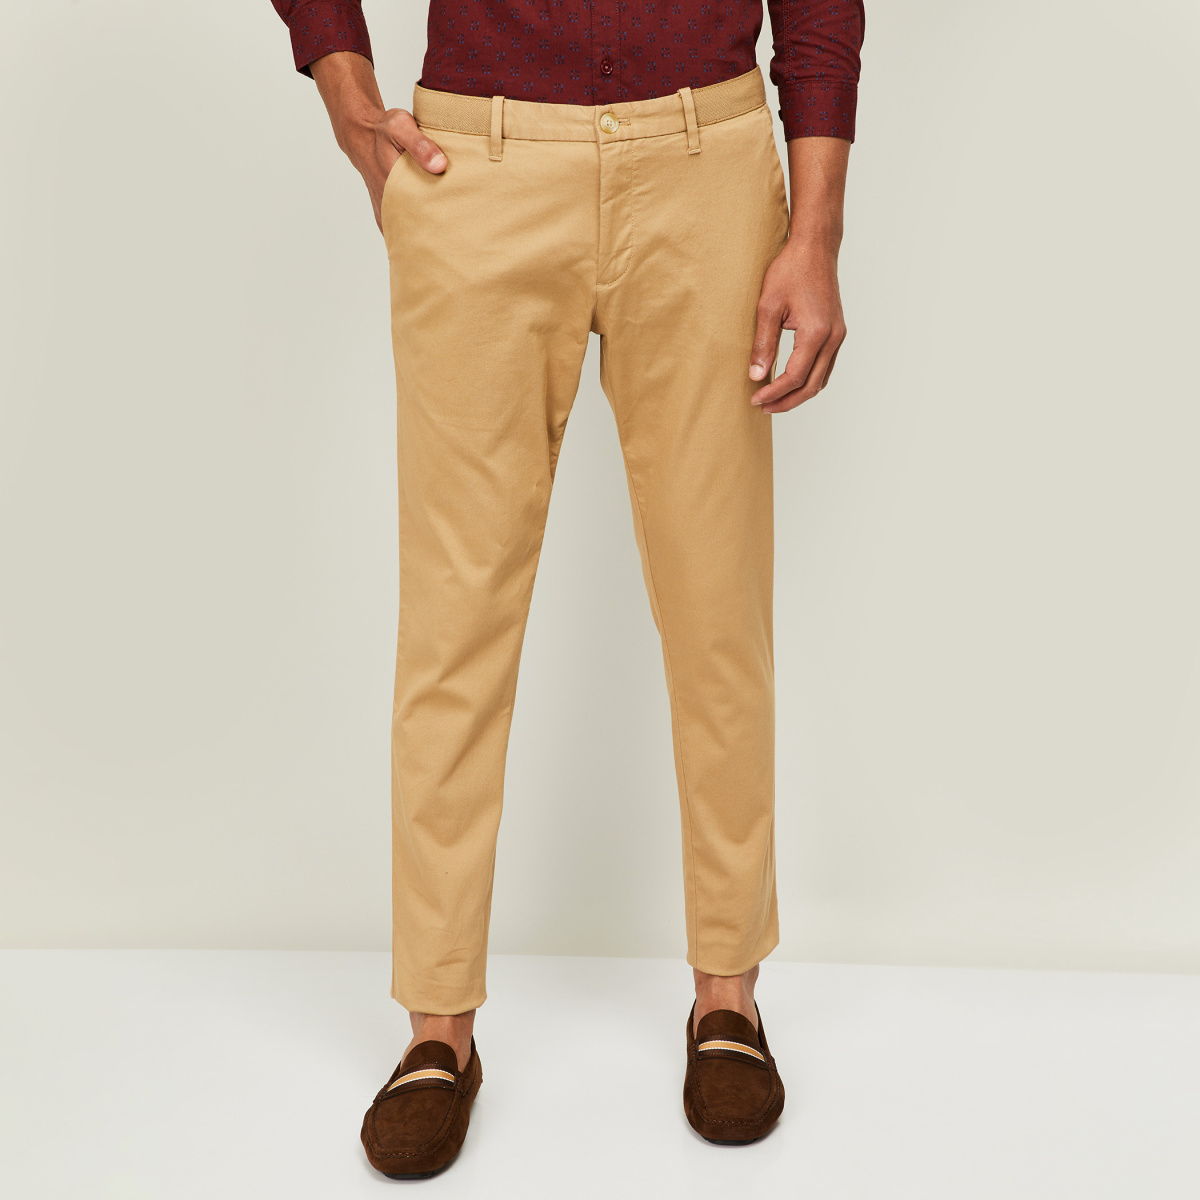 Buy Indian Terrain Burgundy Regular Fit Trousers from top Brands at Best  Prices Online in India  Tata CLiQ